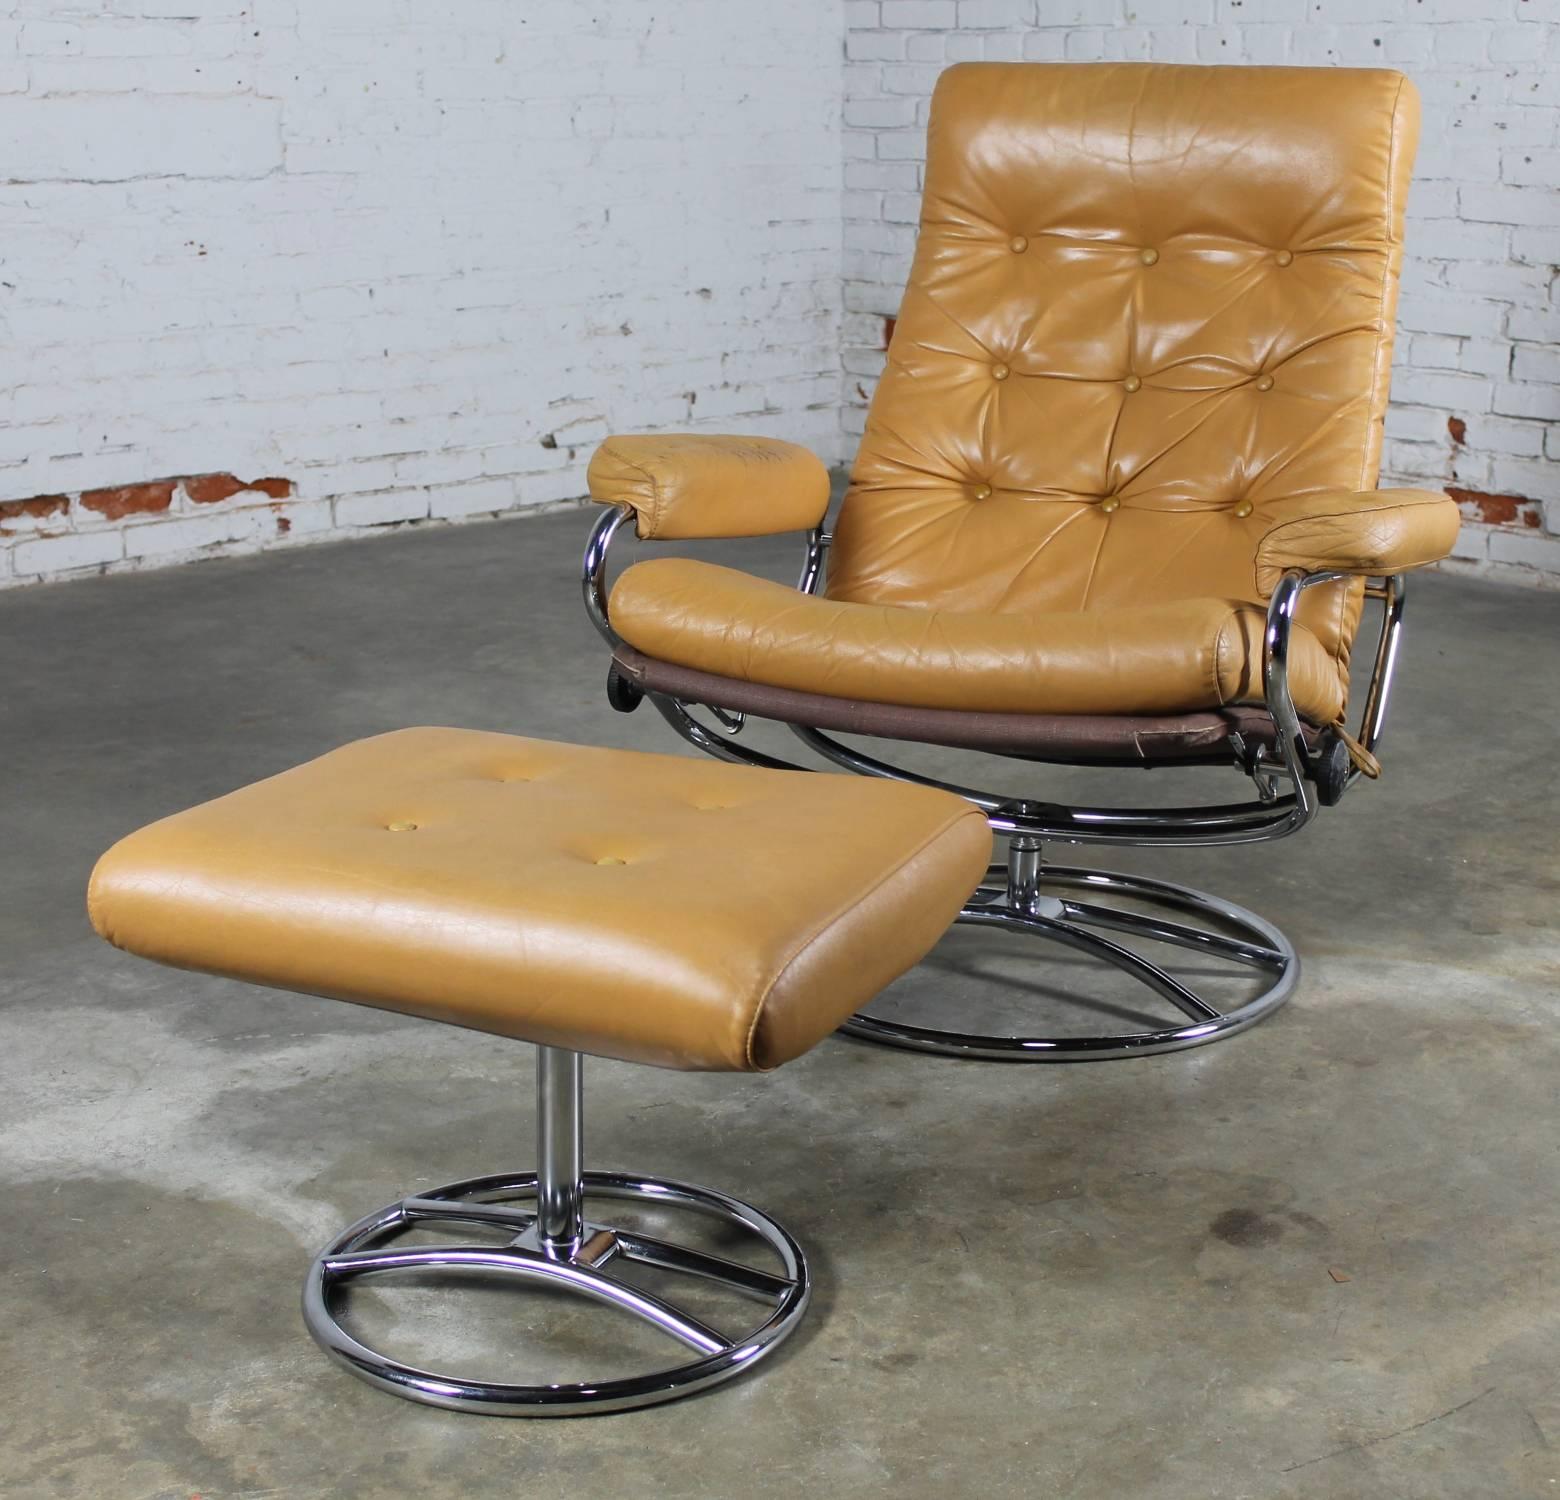 Reclining Lounge Chair And Ottoman, Chairworks Leather Recliner